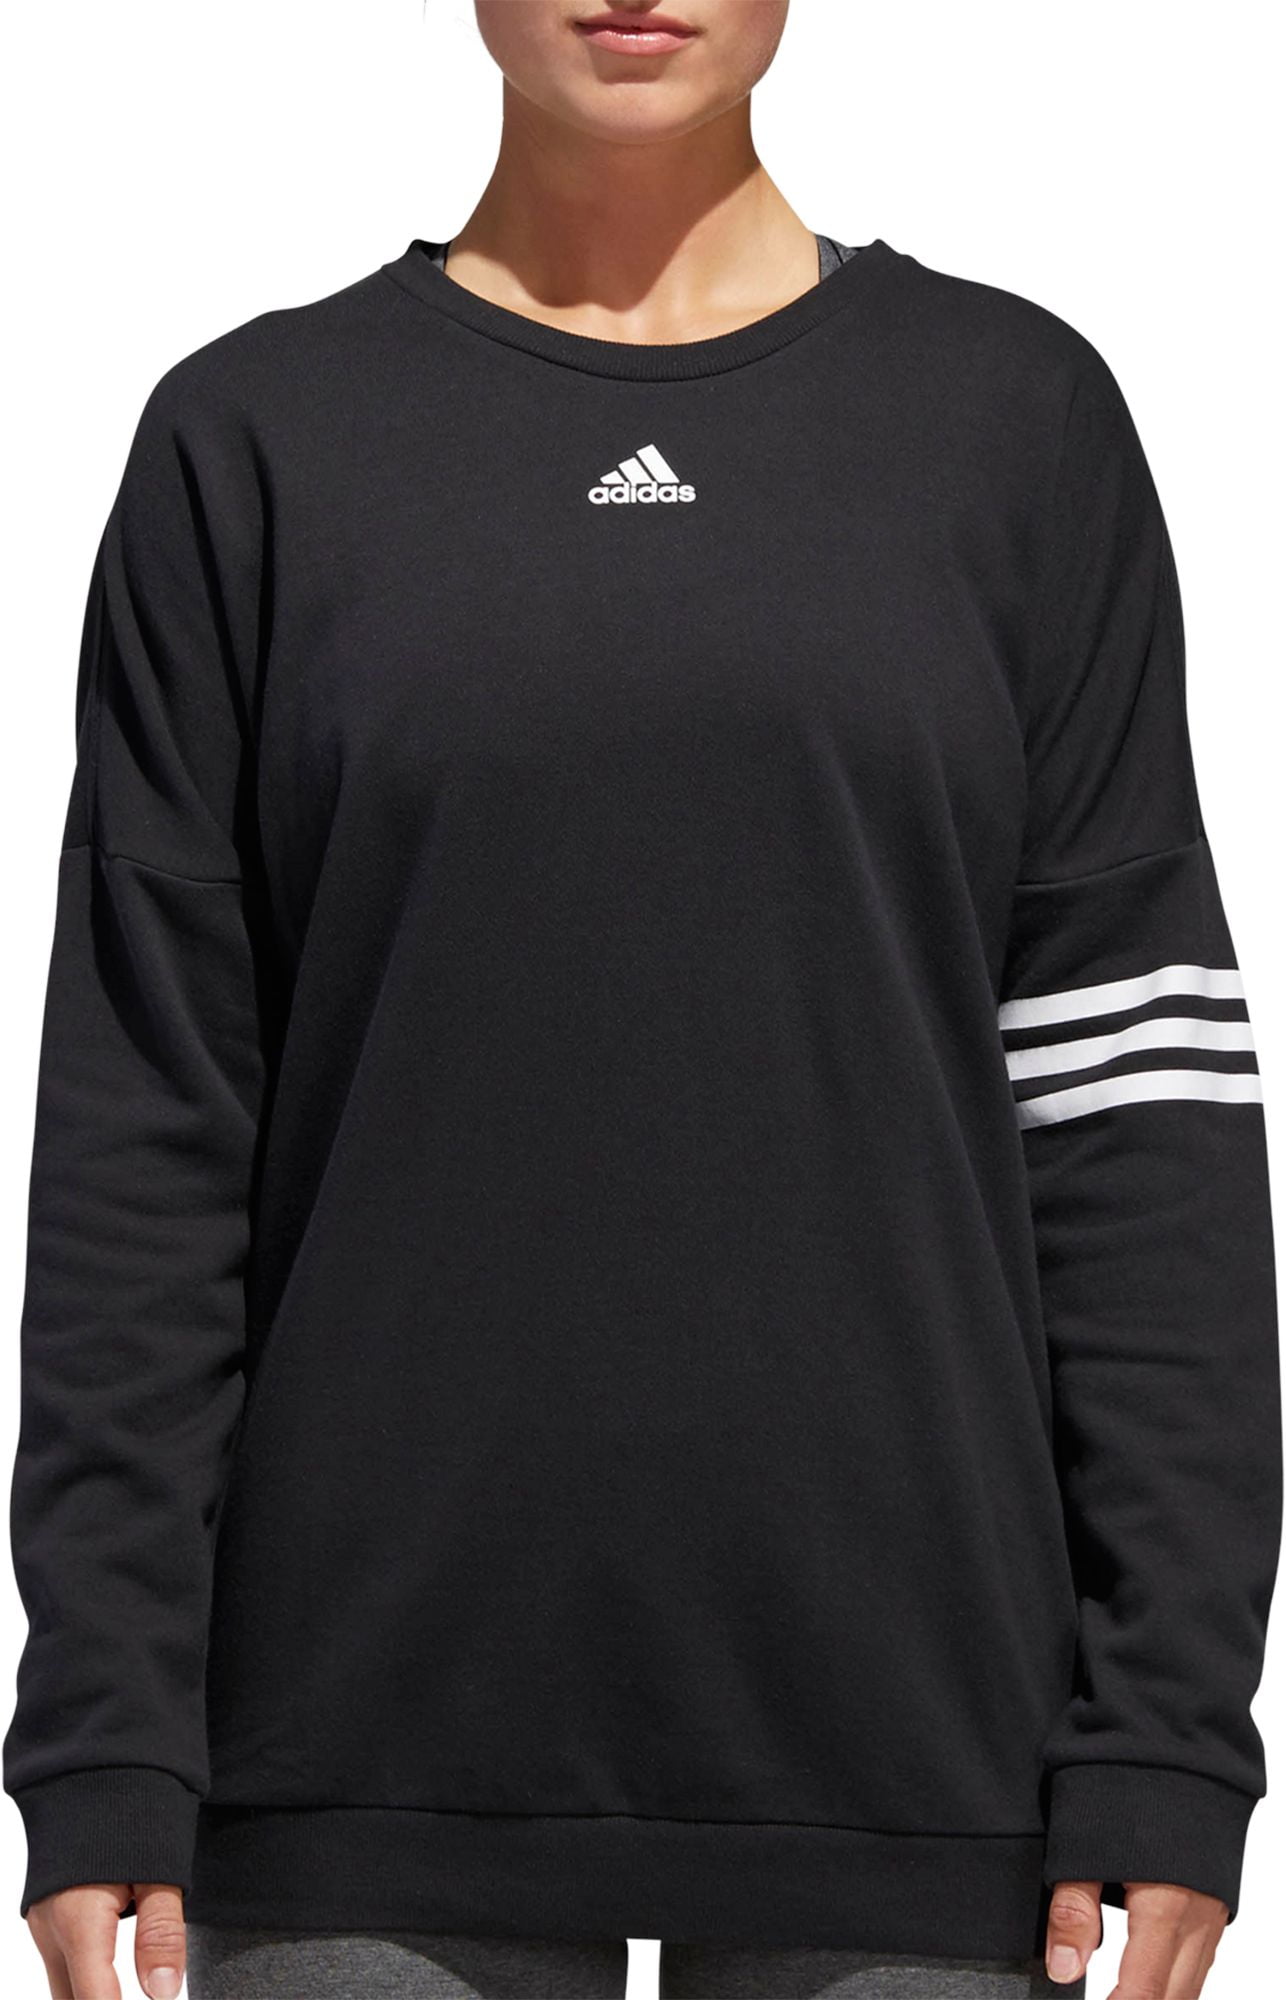 adidas women's athletics french terry crewneck pullover